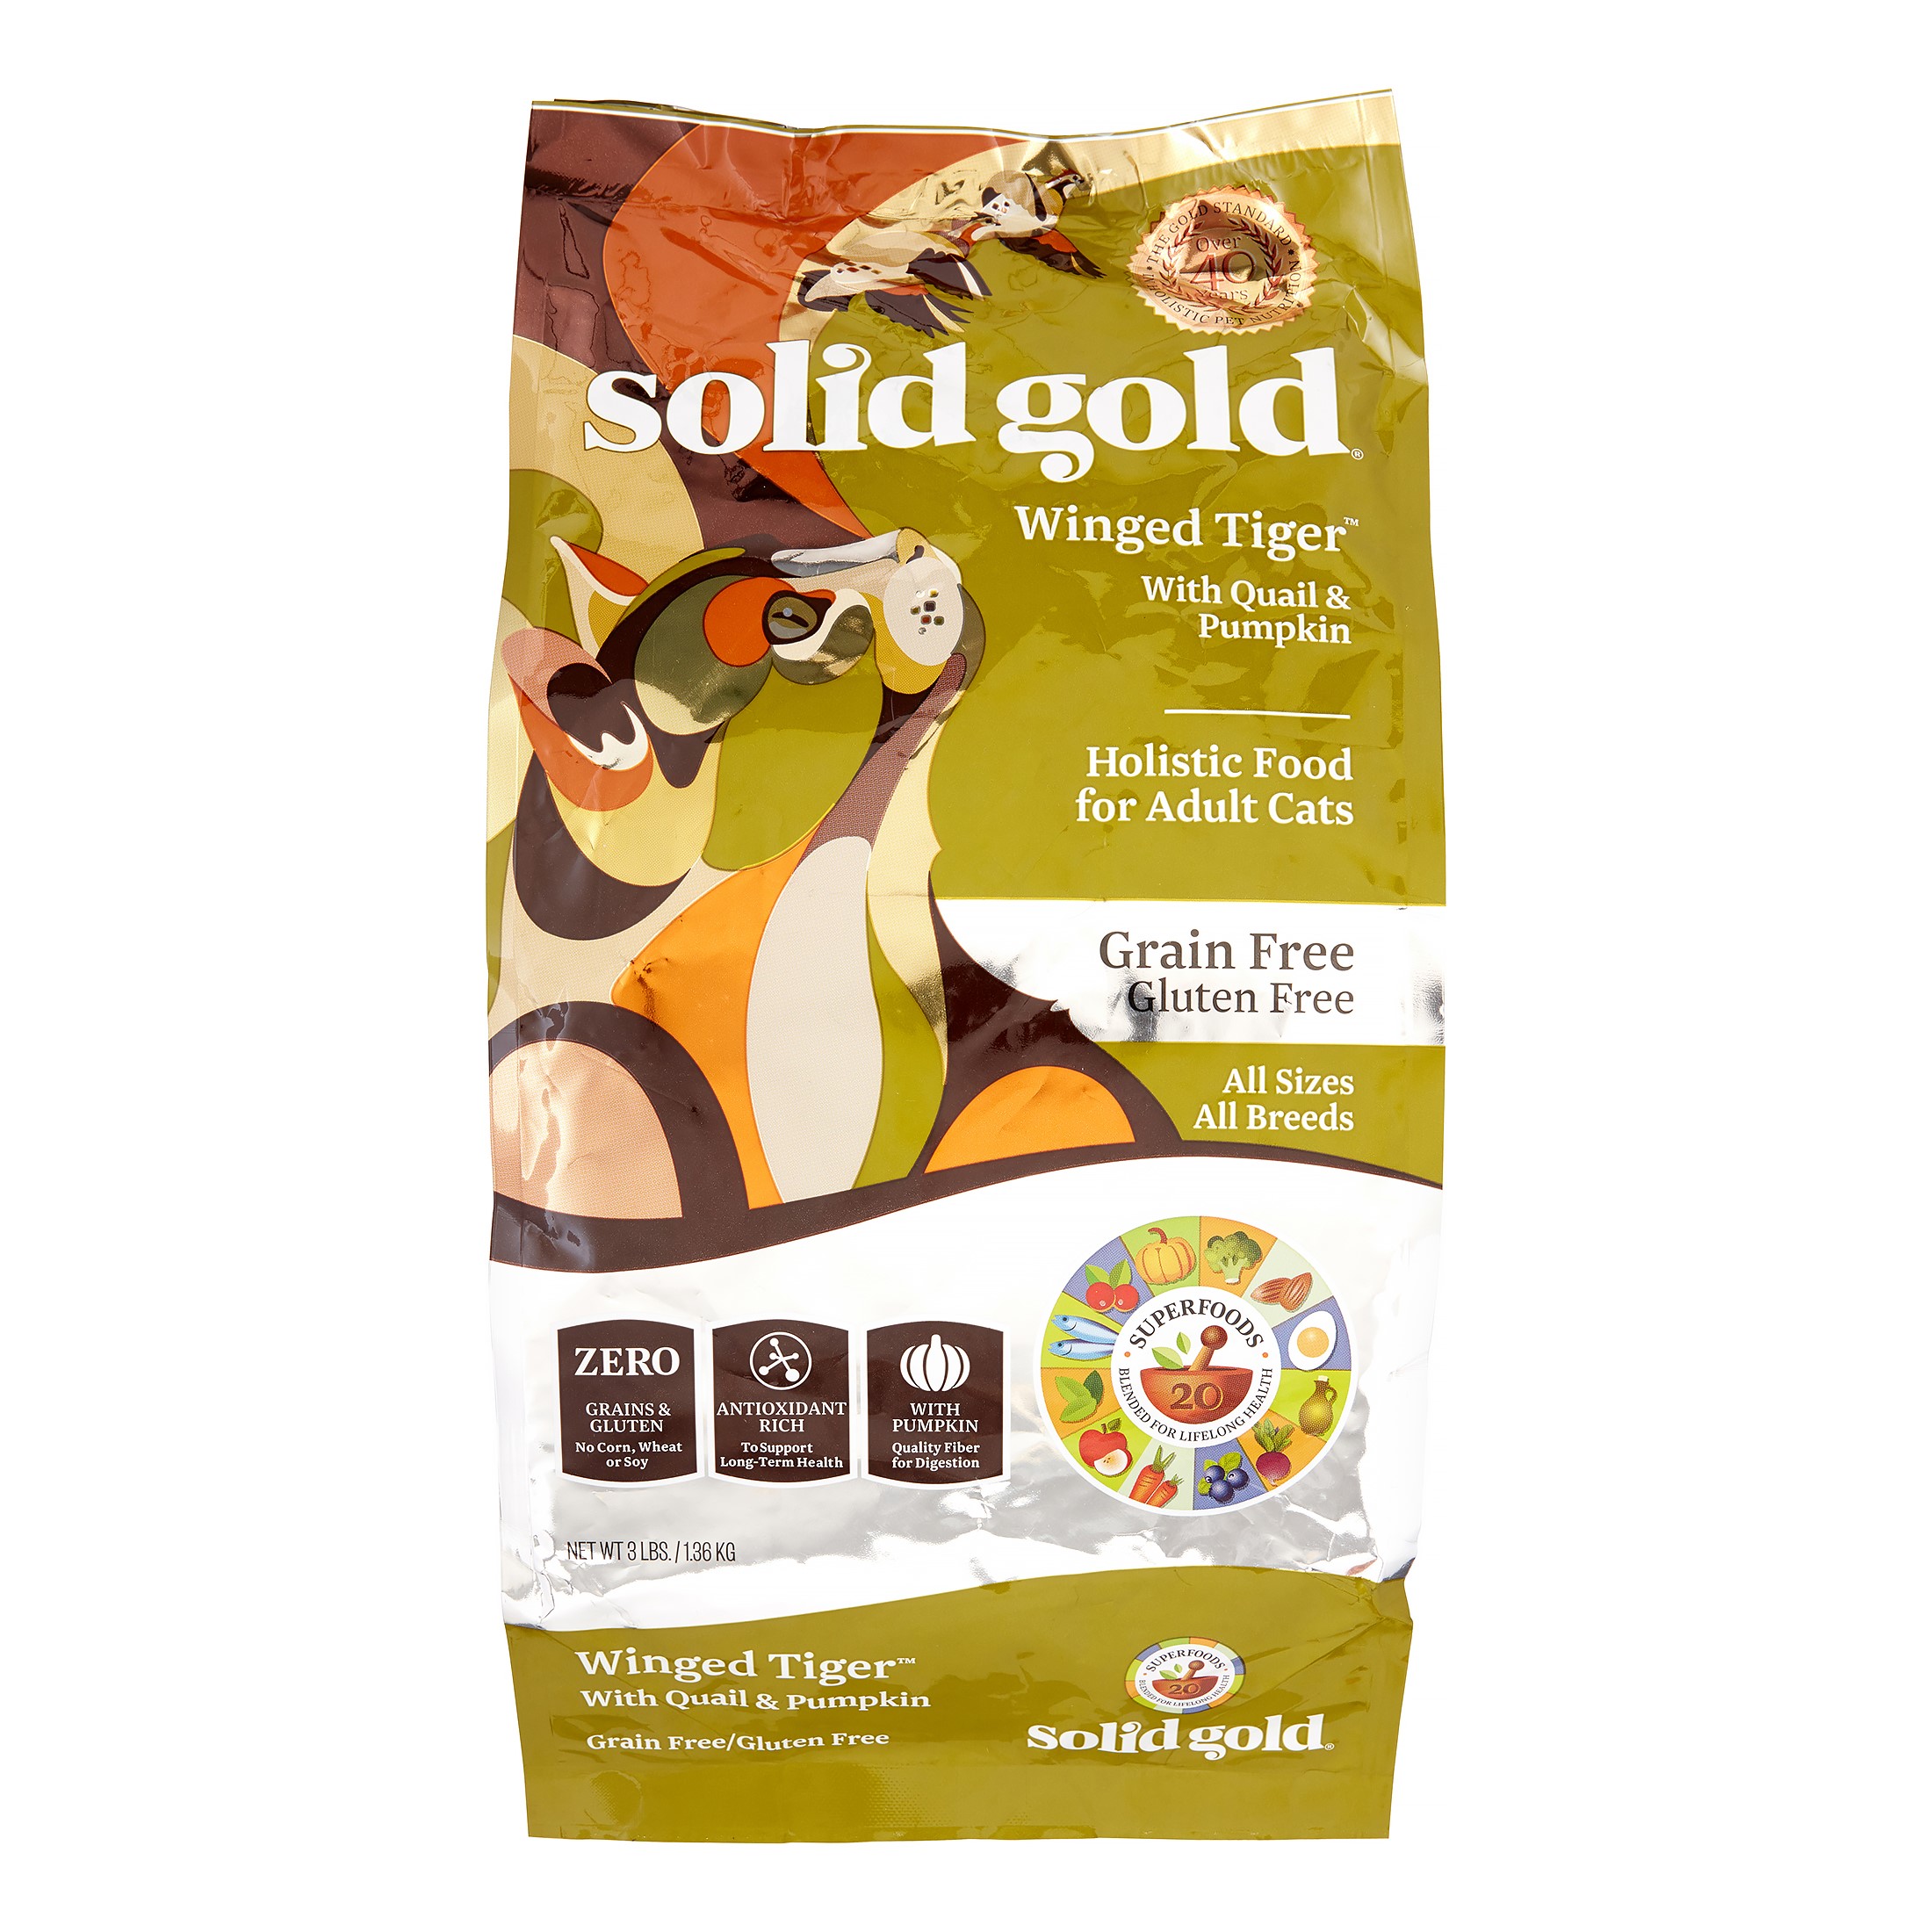 Solid gold winged tiger cat food